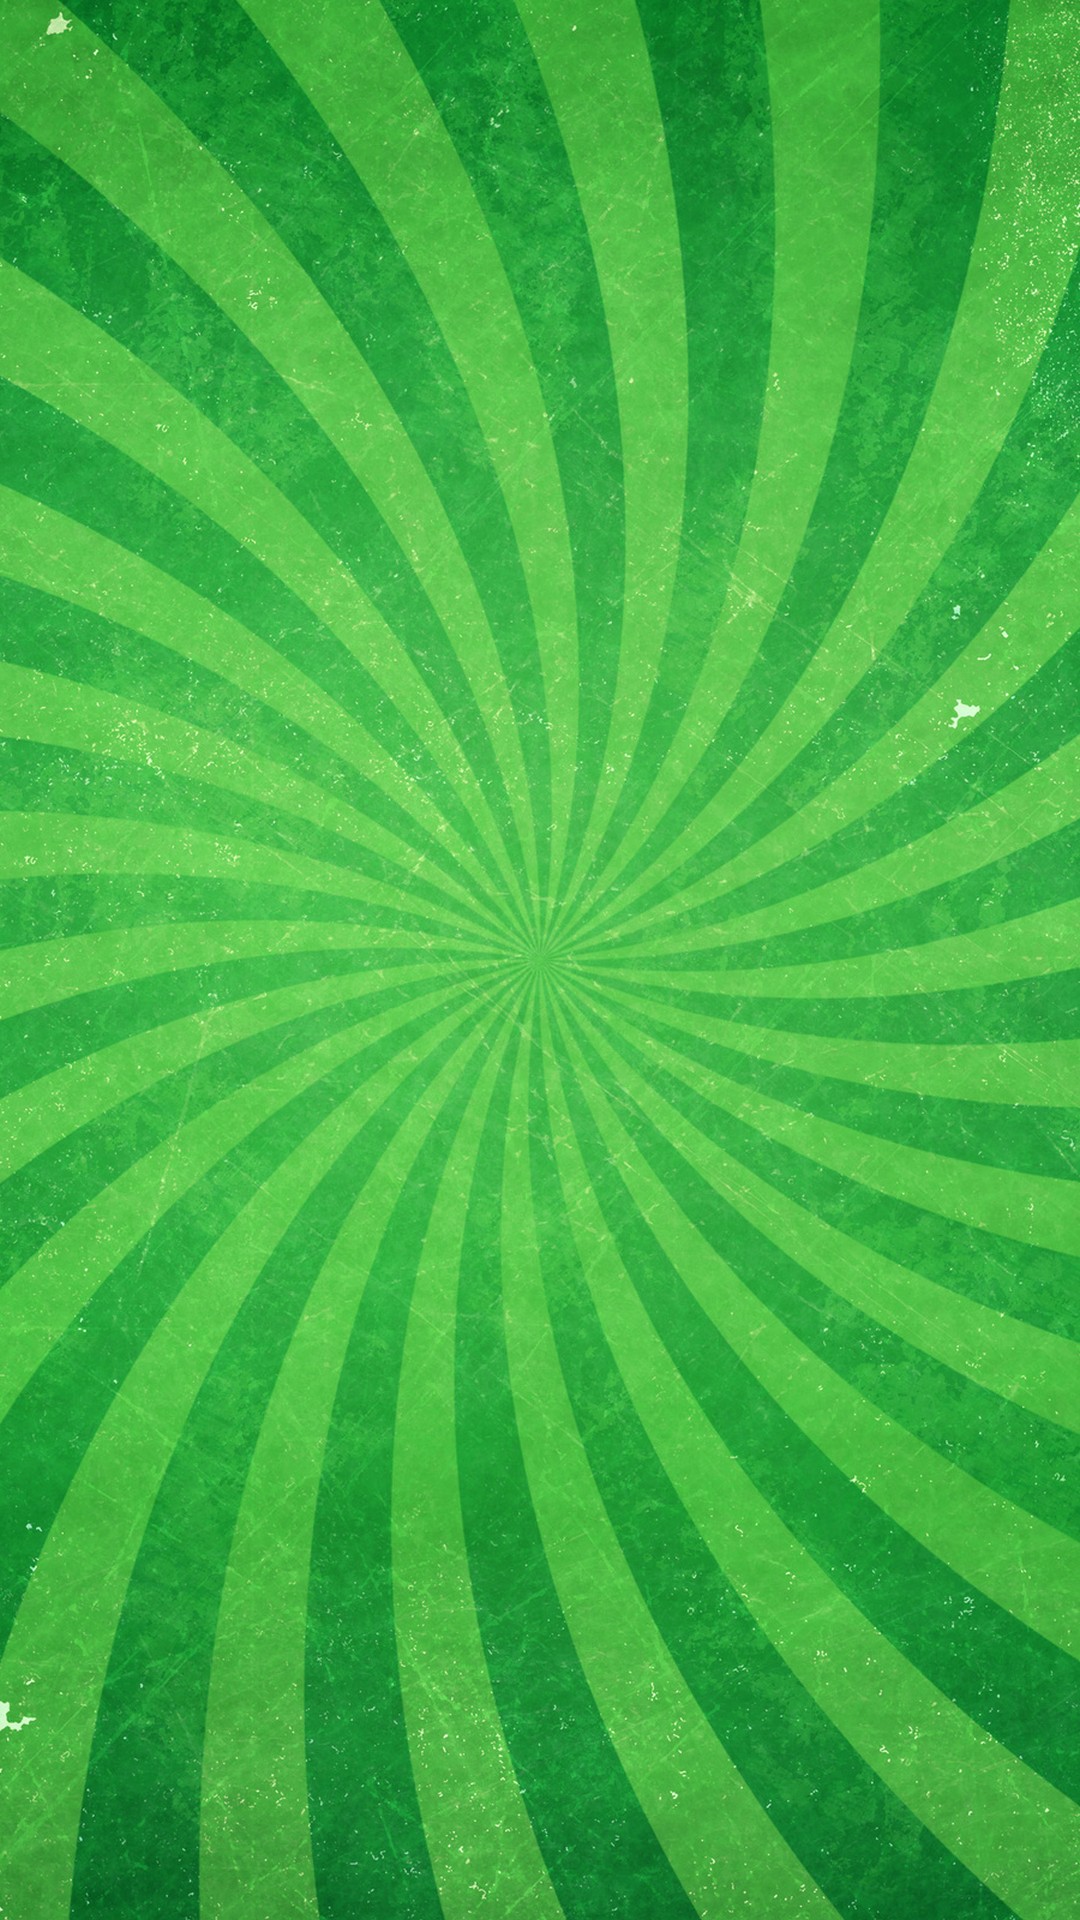 Wallpaper Green iPhone with image resolution 1080x1920 pixel. You can make this wallpaper for your iPhone 5, 6, 7, 8, X backgrounds, Mobile Screensaver, or iPad Lock Screen